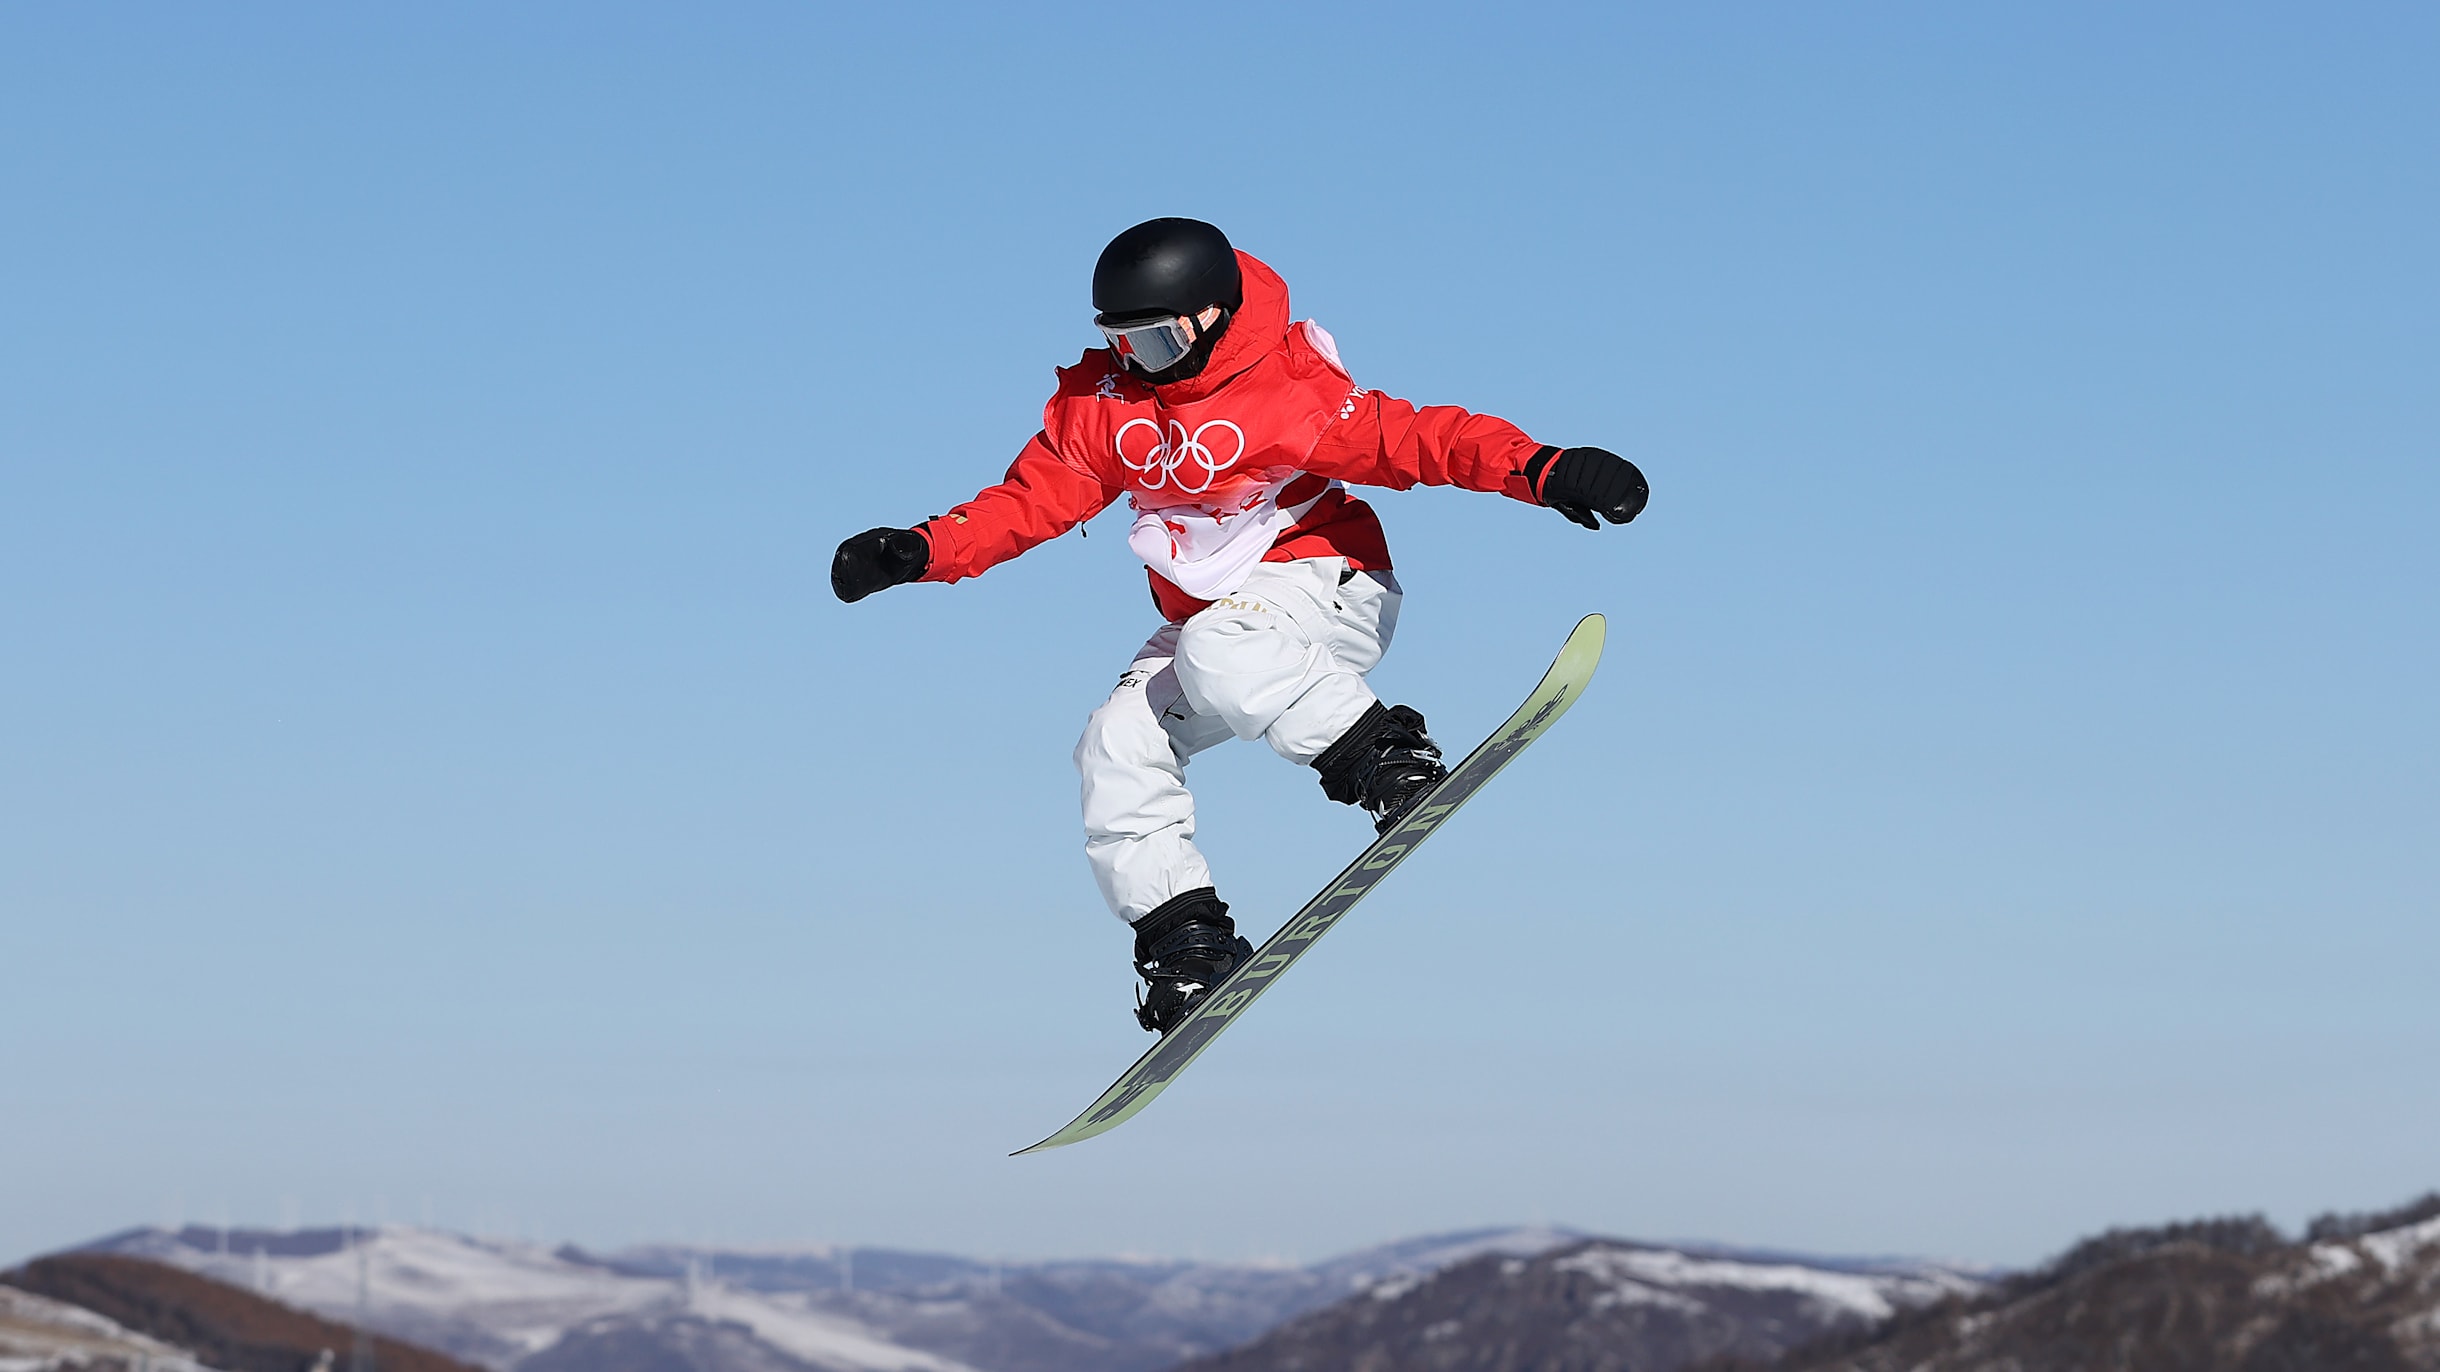 live olympic snowboarding